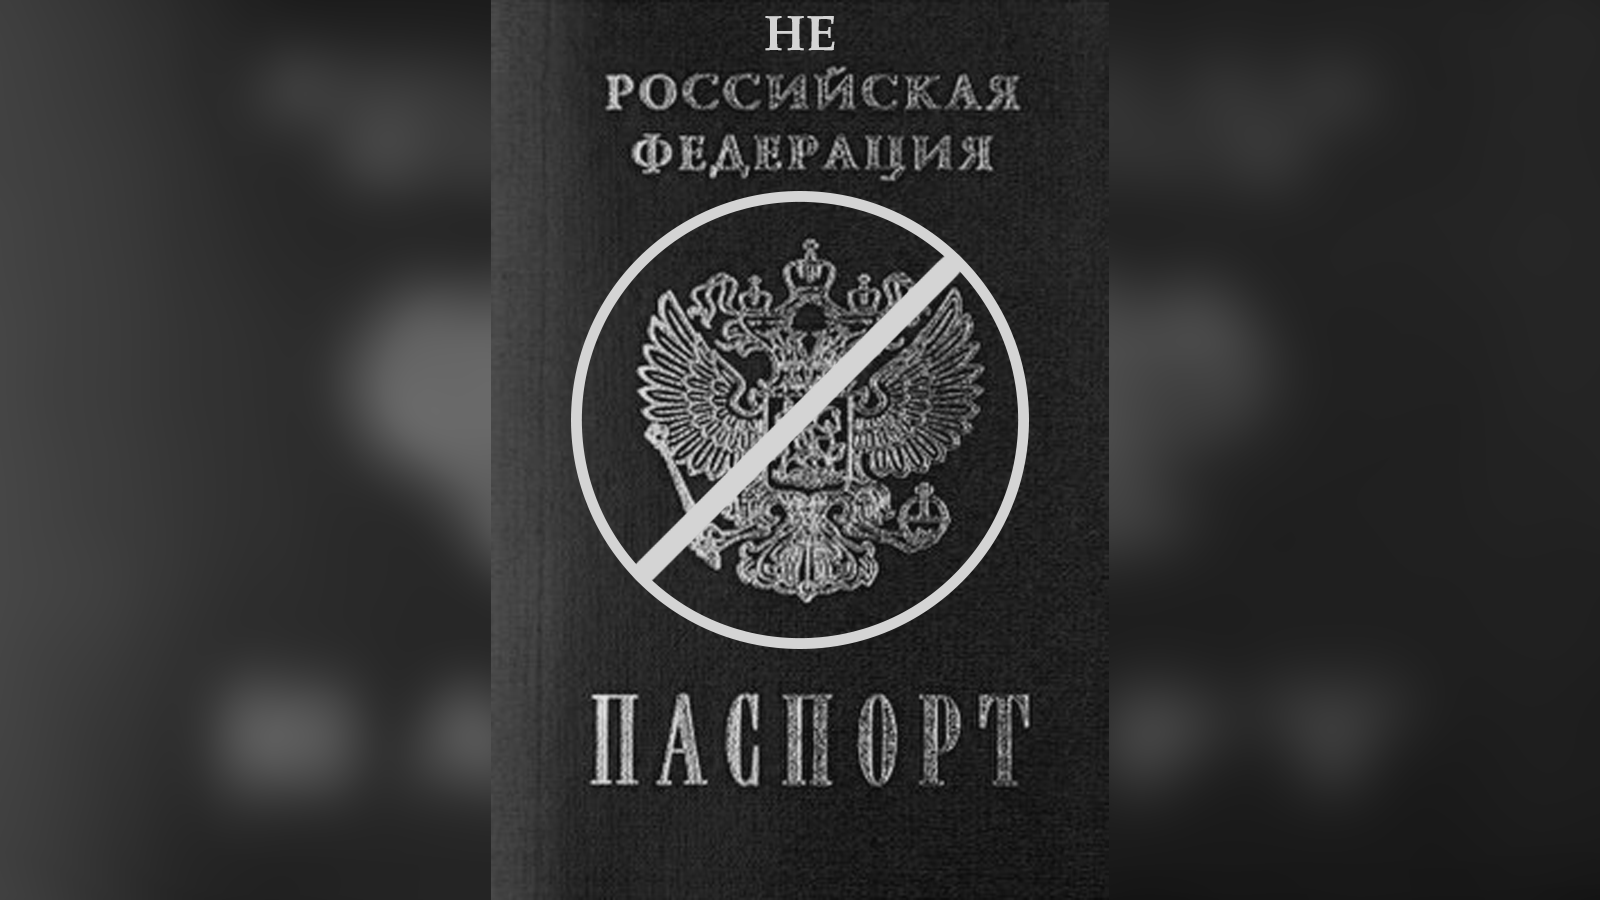 “I will buy a non-russian passport, for a high price”